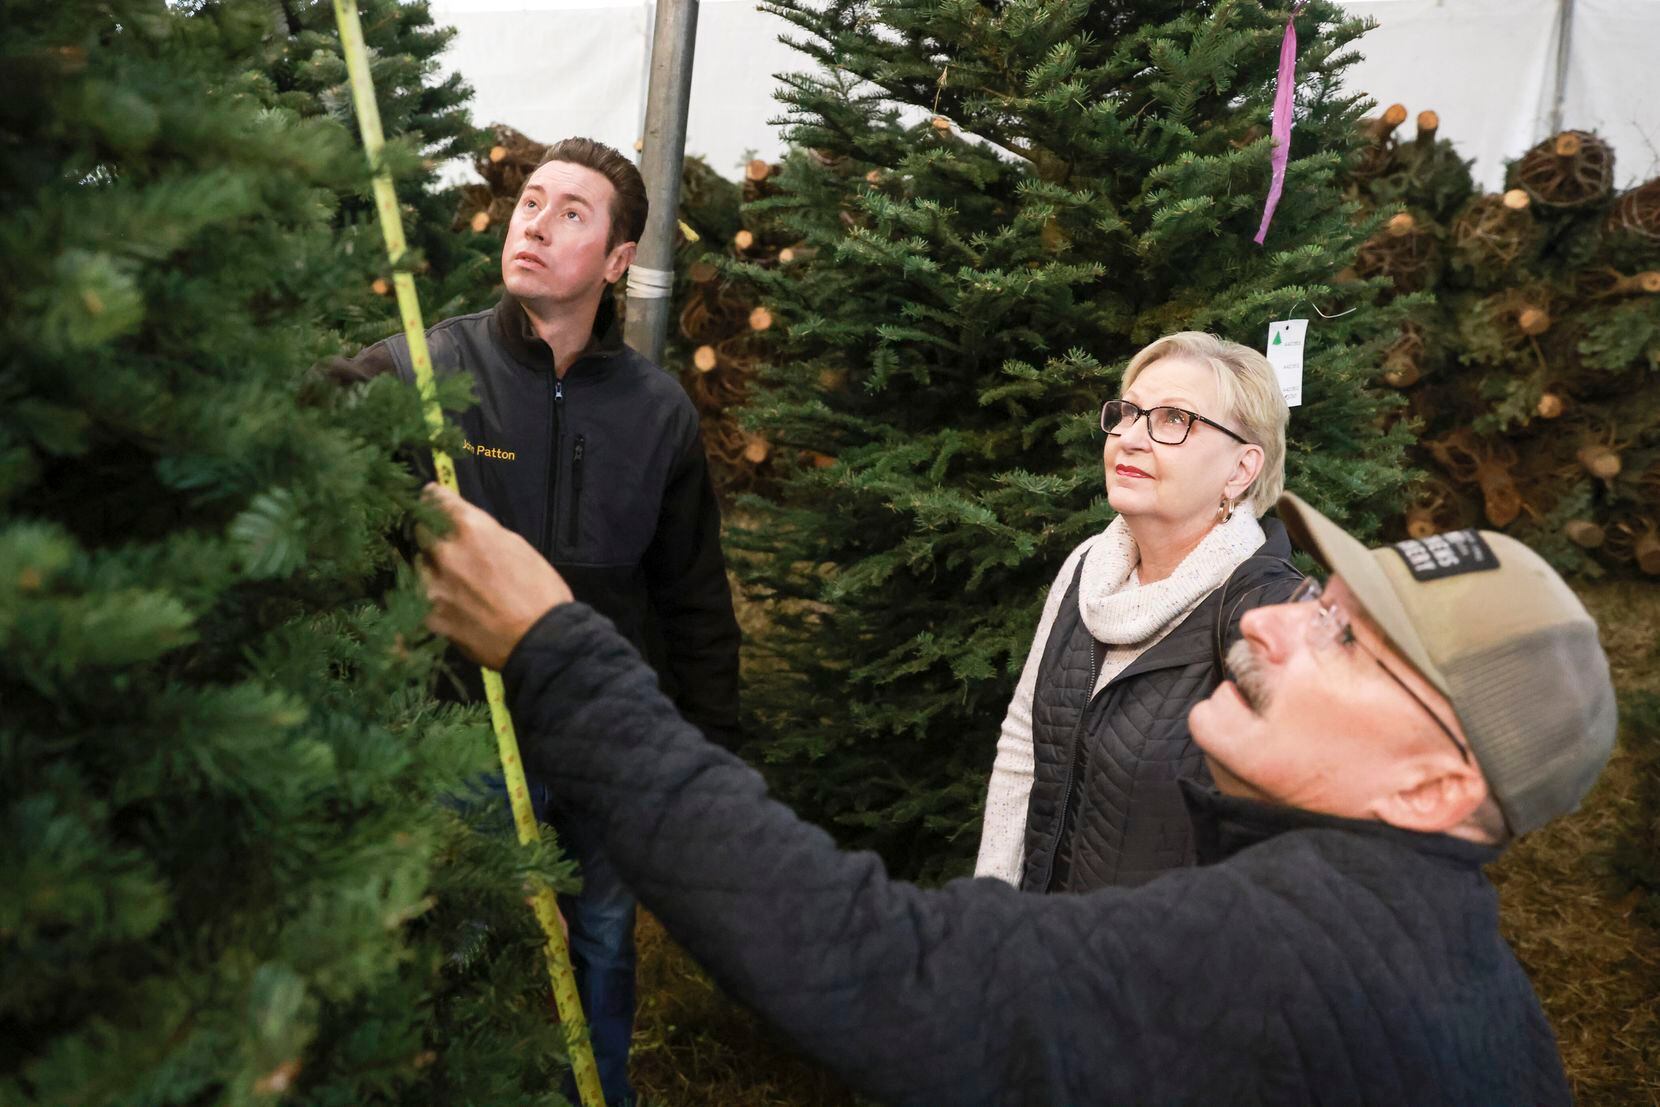 Owner John Patton and Candace Cain watch as Brian Cain measures the height of a Christmas...